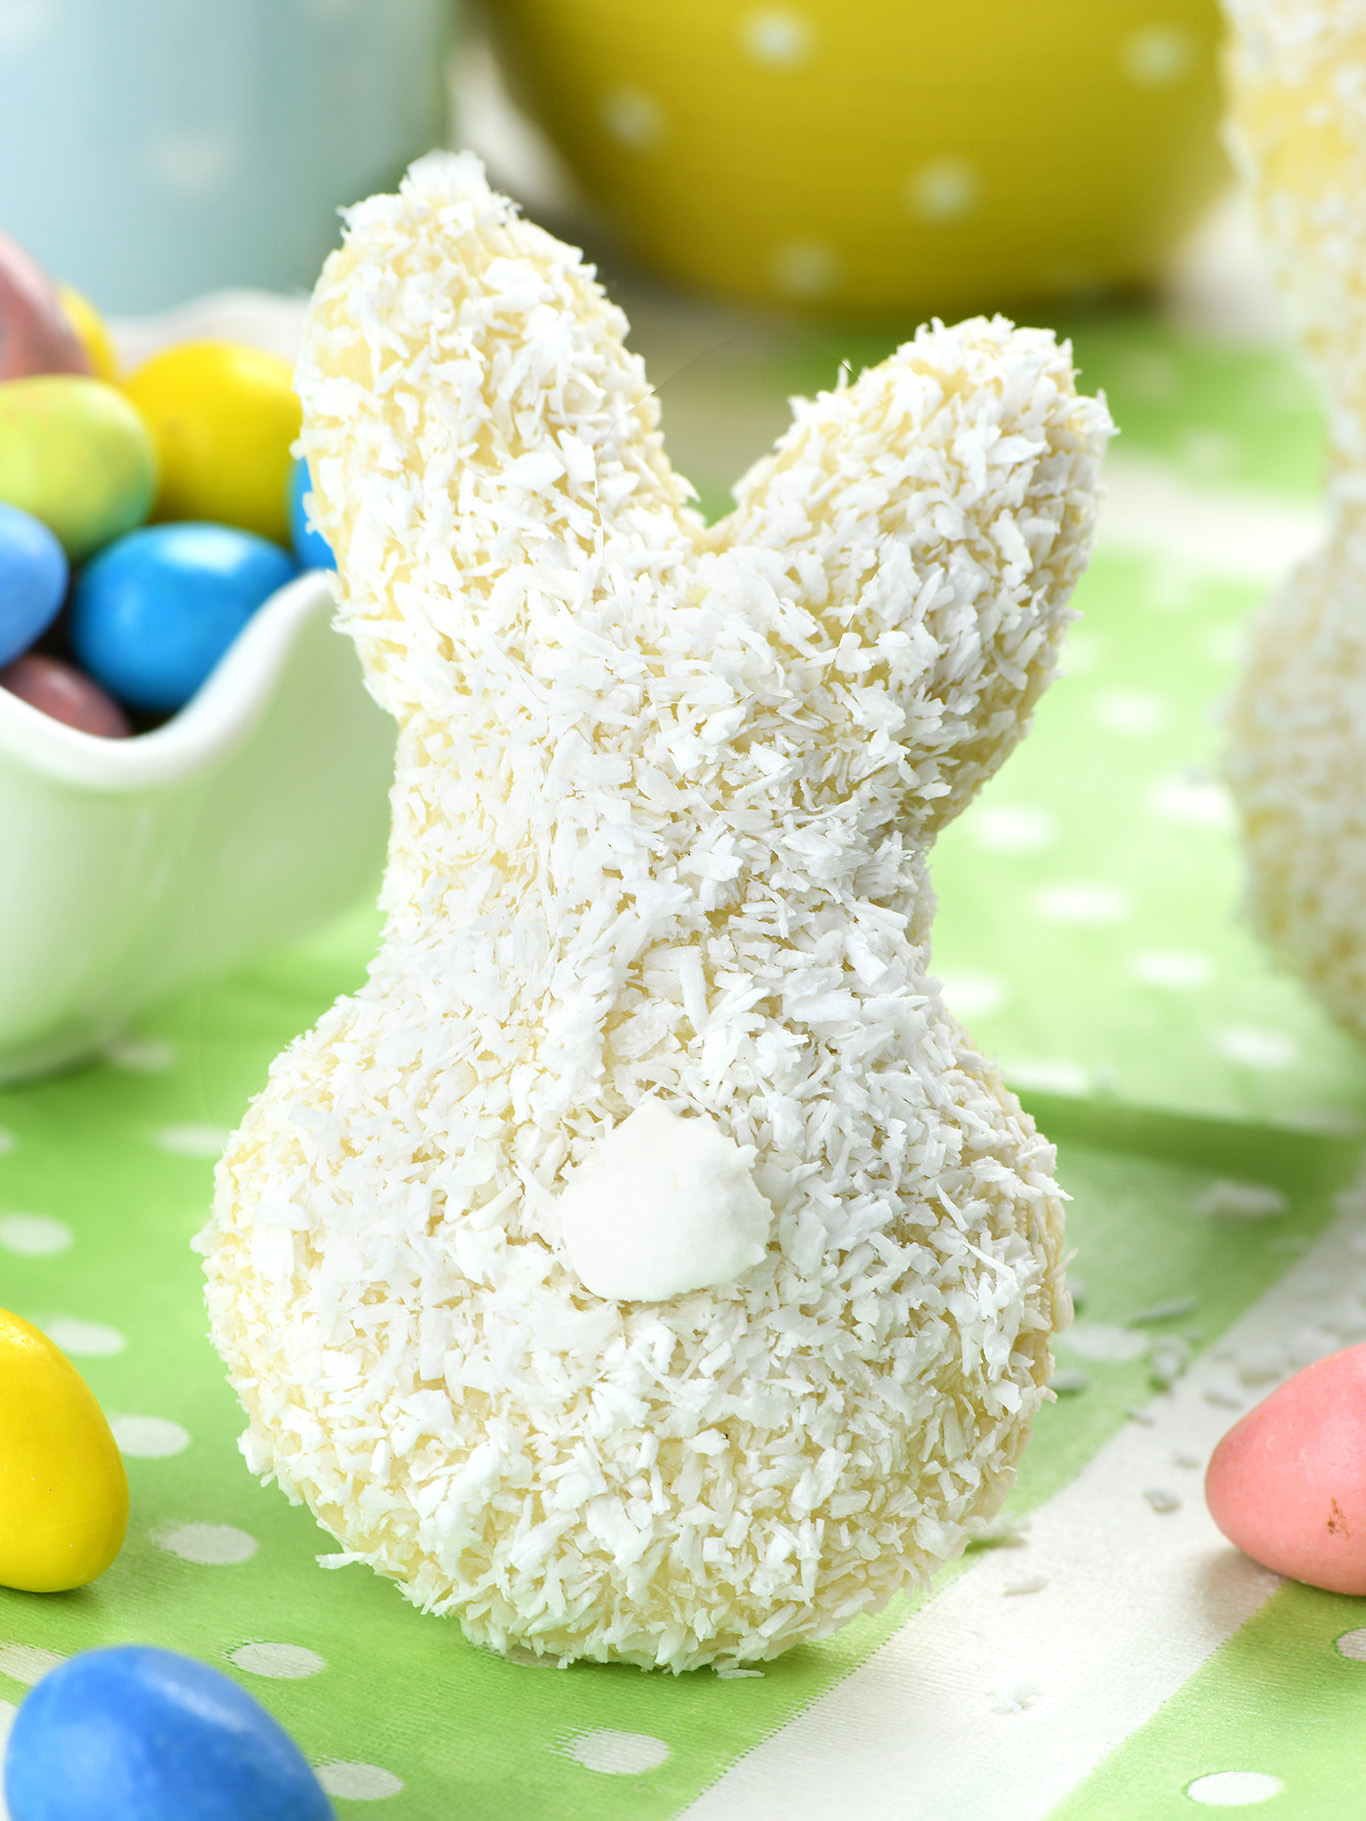 An Easter bunny-shaped cookie coated with shredded coconut to resemble fur, standing upright on a table with a polka-dotted green tablecloth. The background suggests a festive Easter setting with pastel-colored Easter eggs in soft focus.